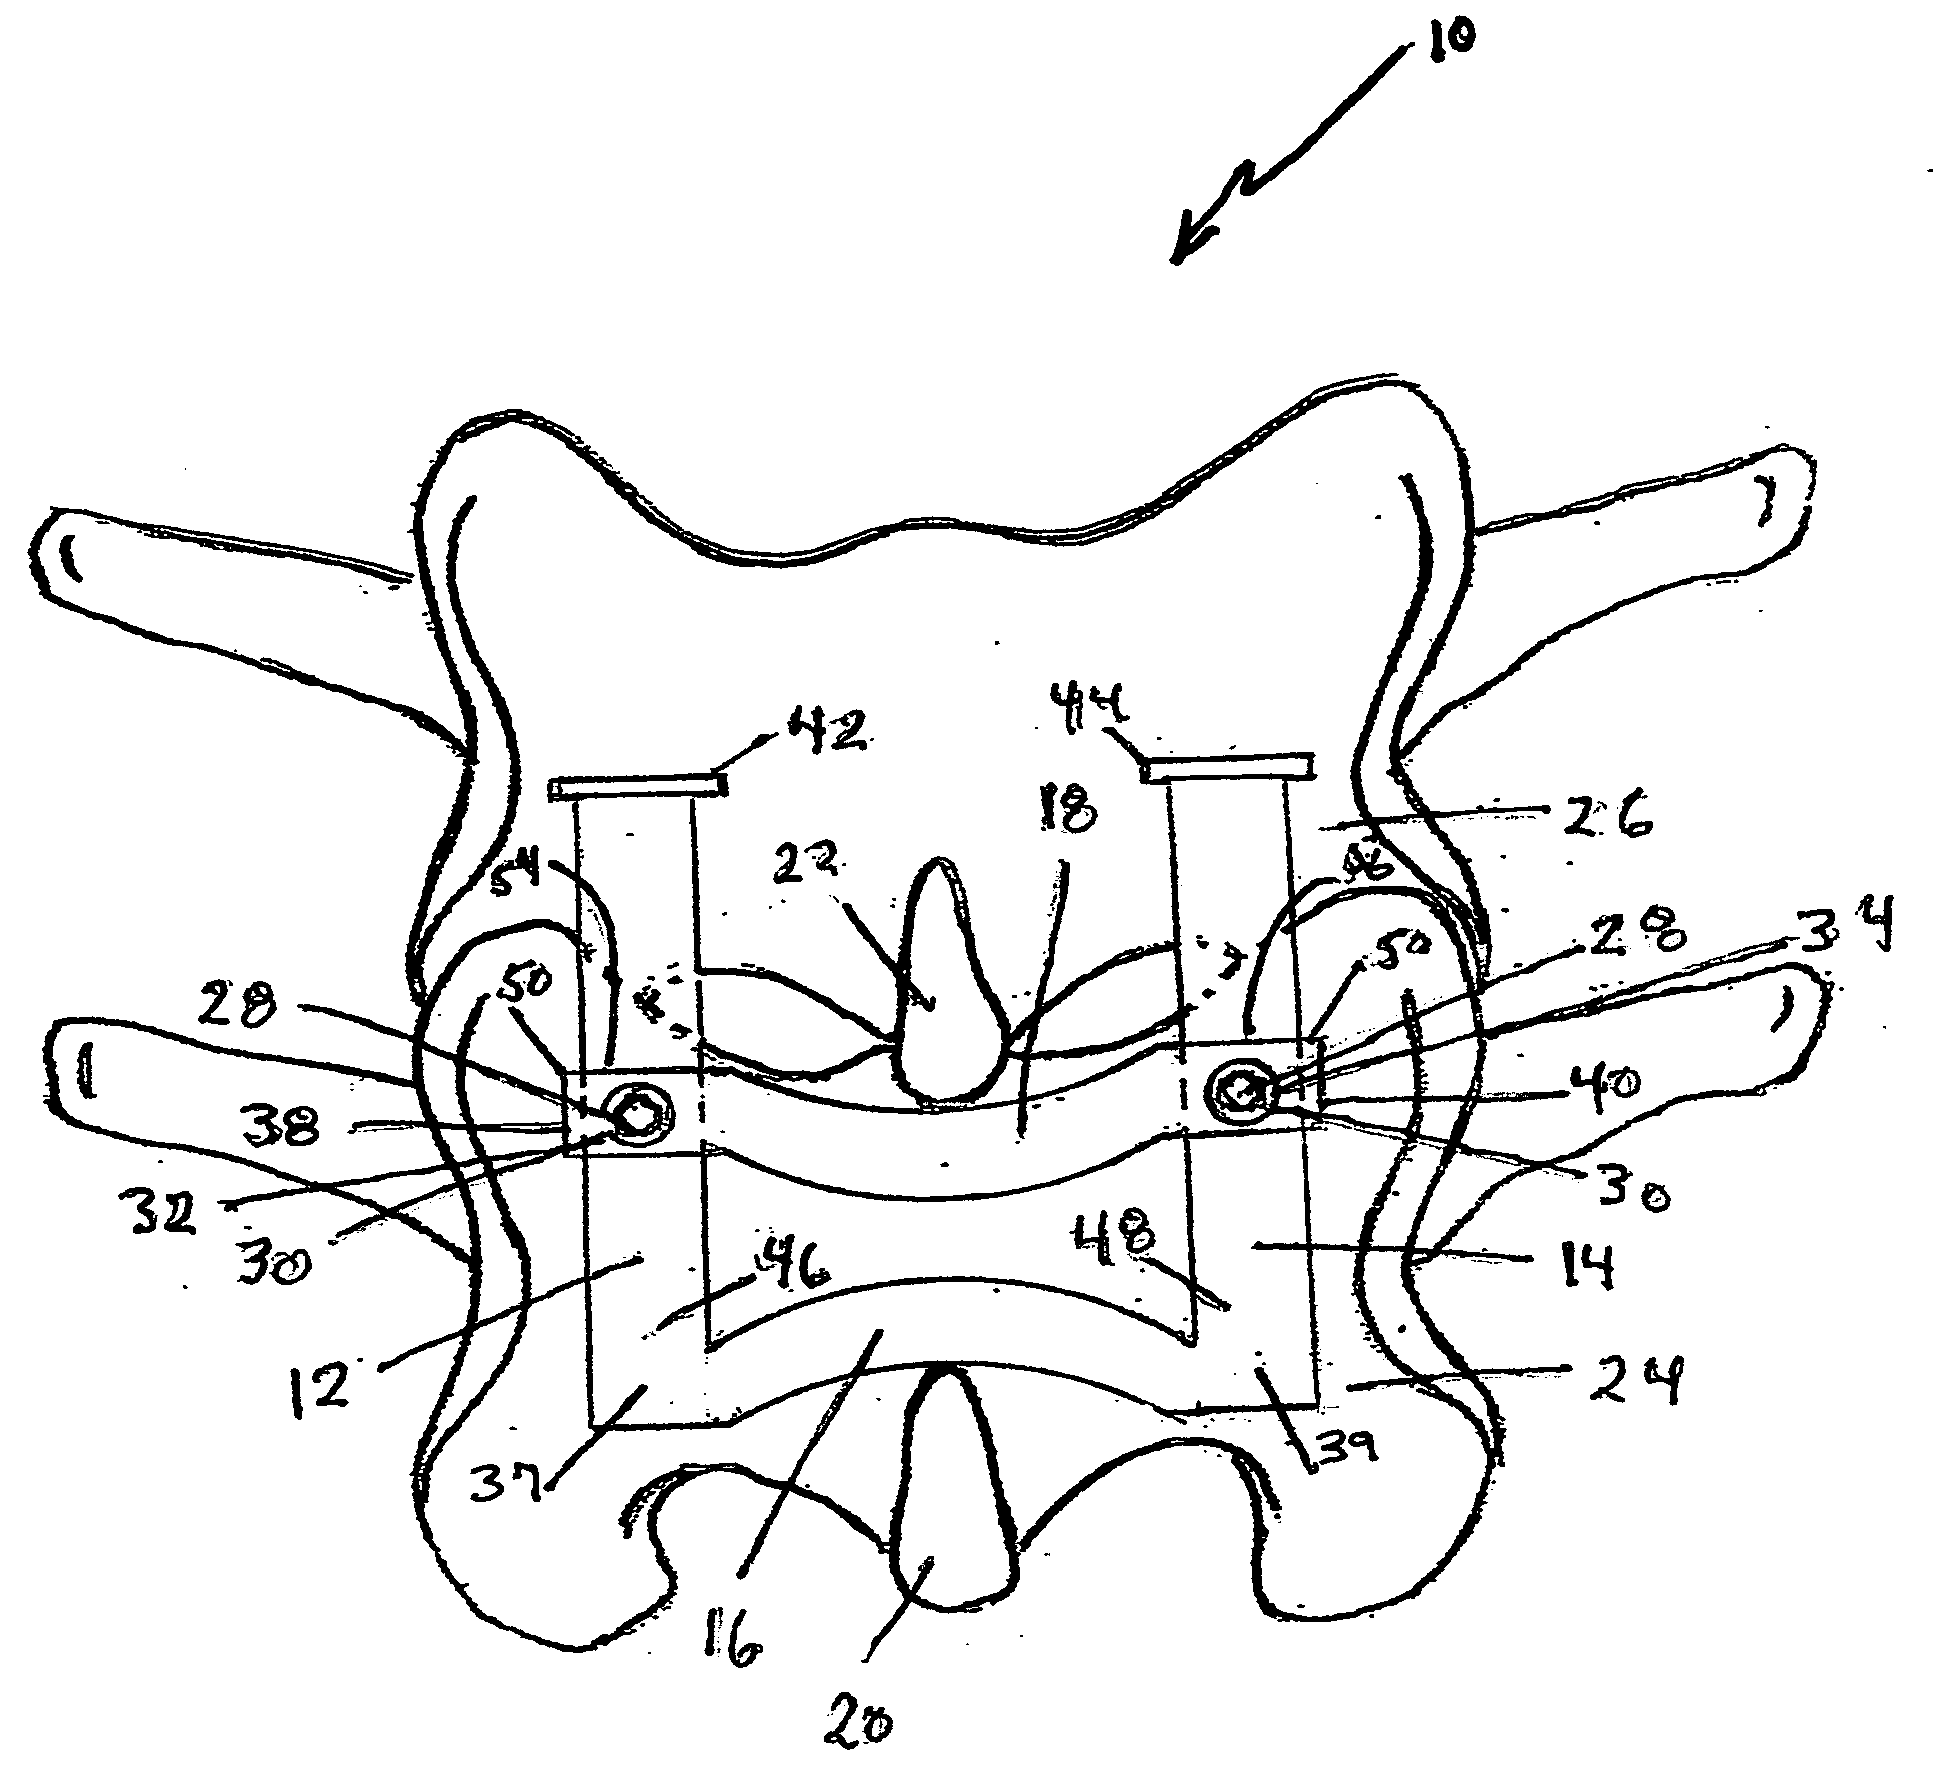 Adjustable spinous process spacer device and method of treating spinal stenosis